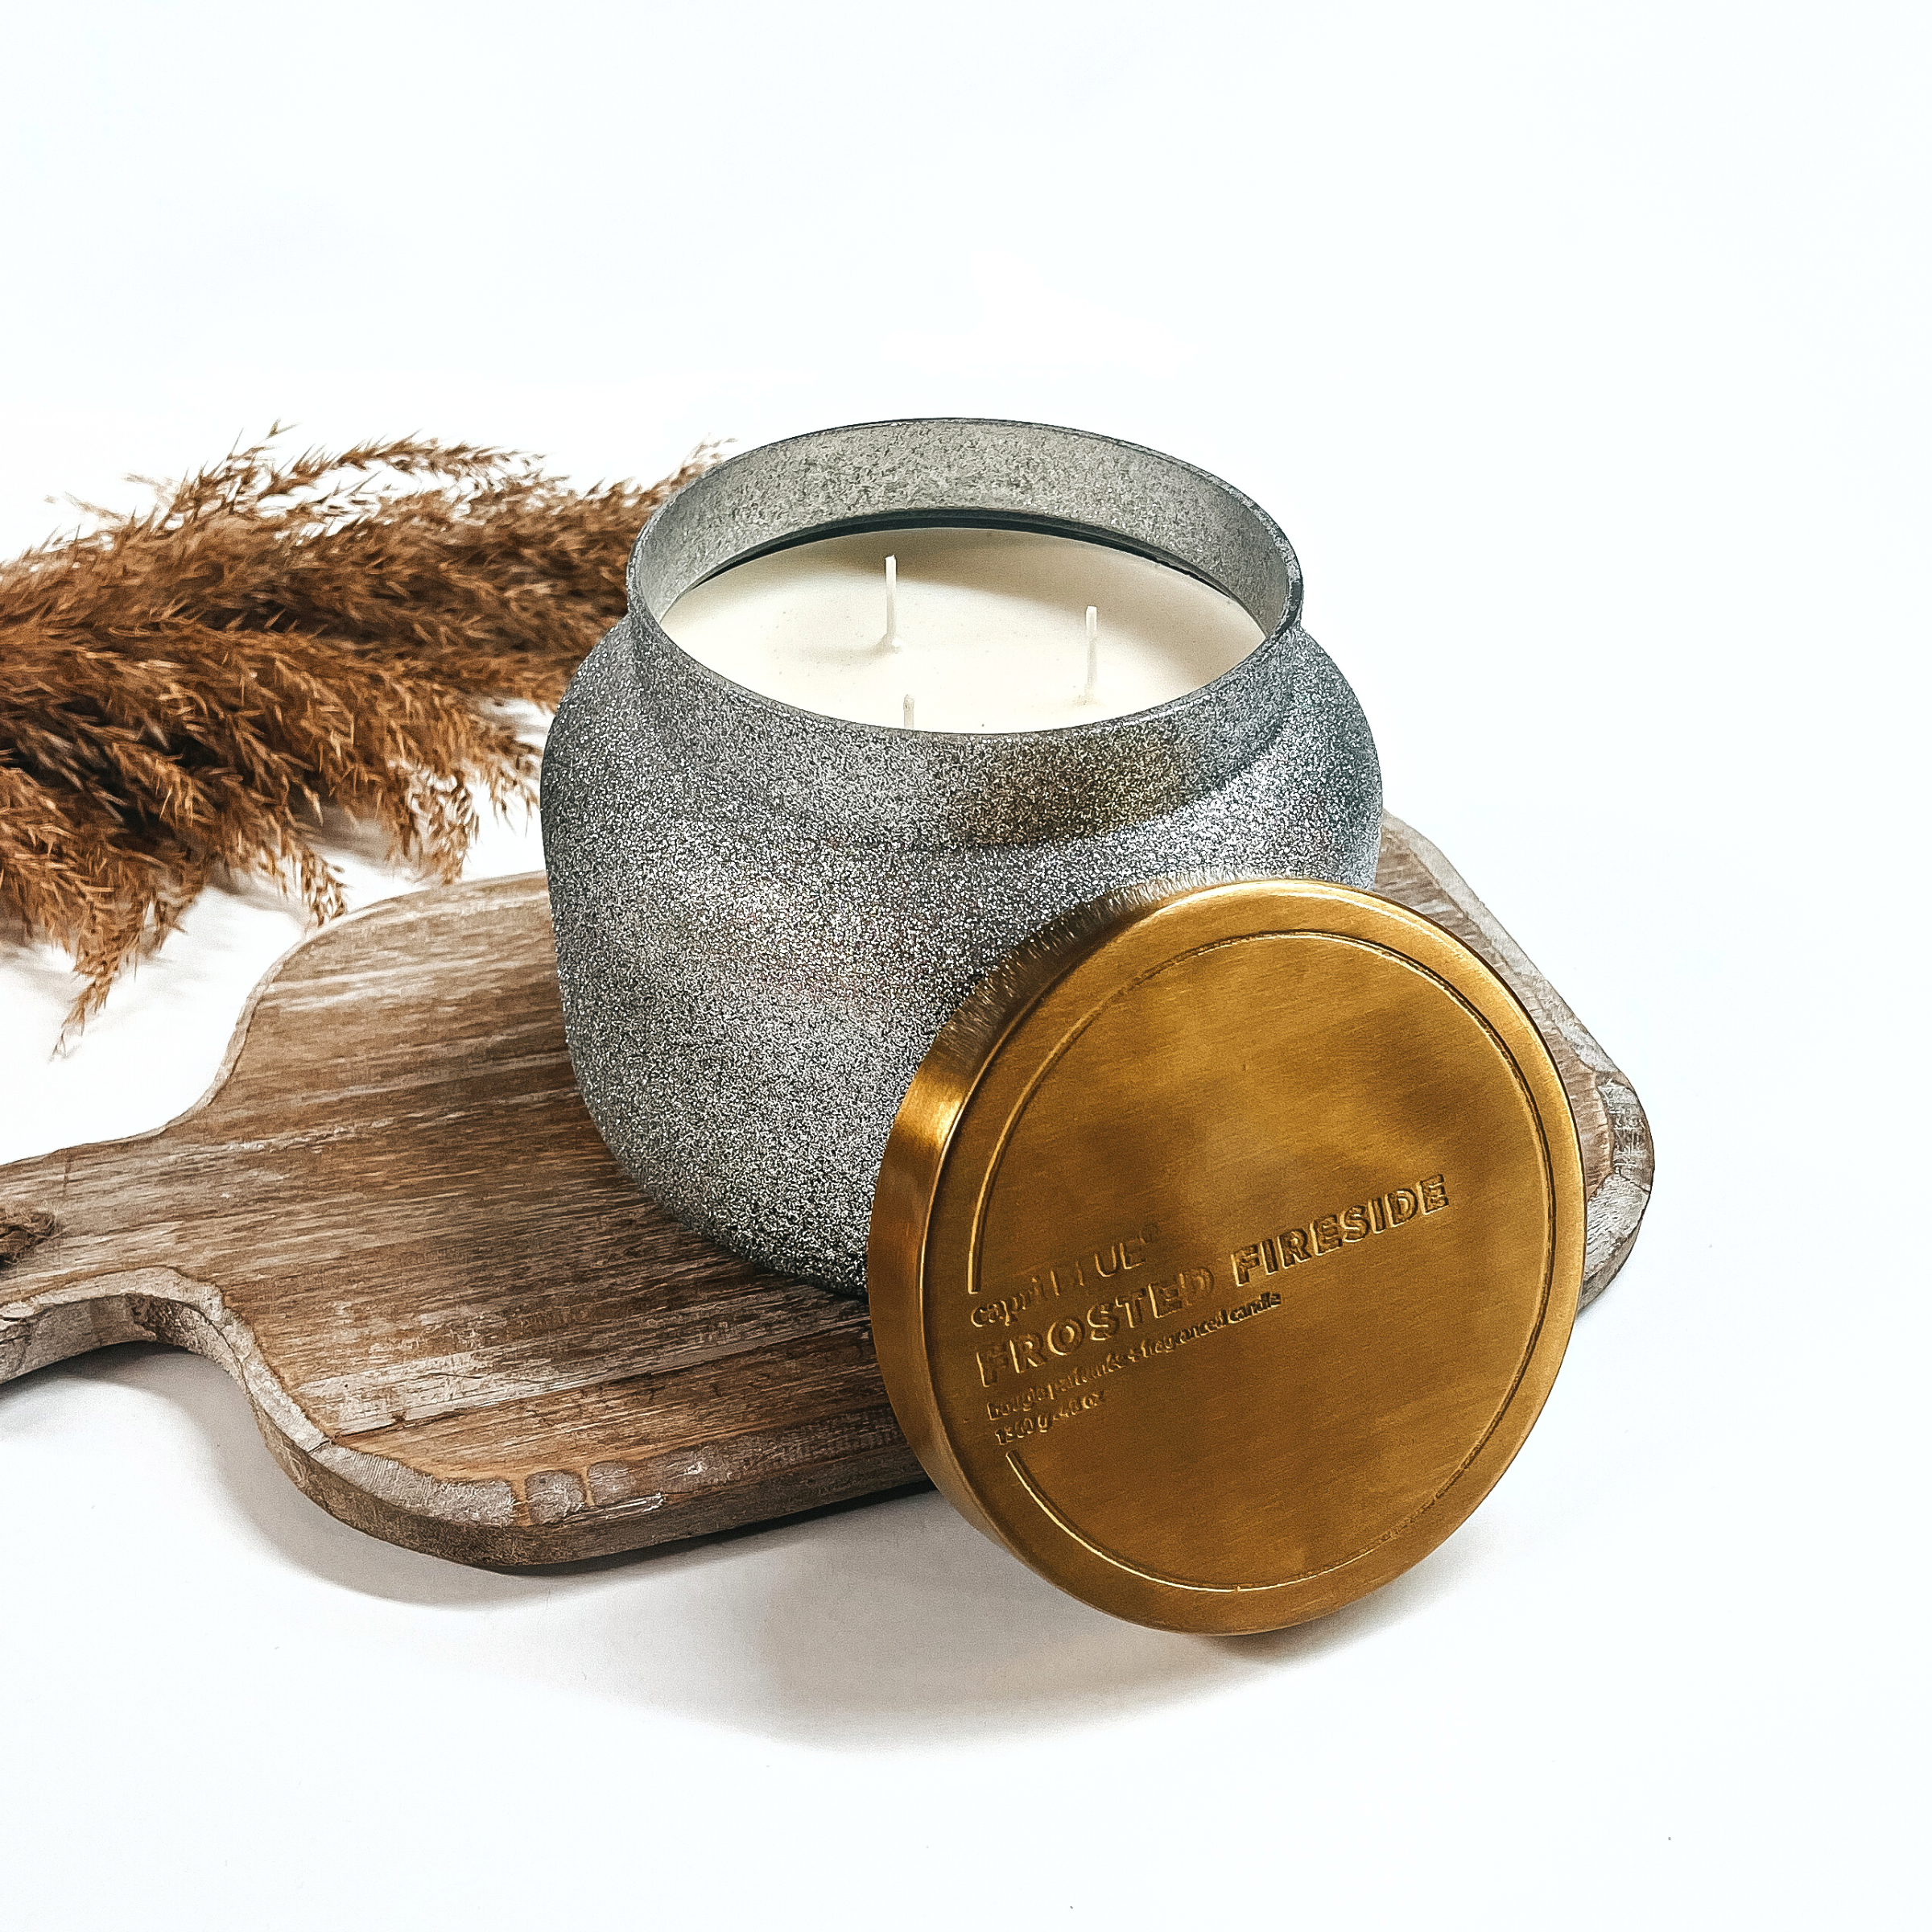 Pictured is a 48 oz. Marble Petite Jar Candle in Silver Glitter from Capri Blue. The candle scent is Frosted Fireside, which smells like smoked cedar, crackling pine and sweet peppermint. This candle has a burn time up to 100 hours. It is pictured open, with the top propped up, on a wicker tray.